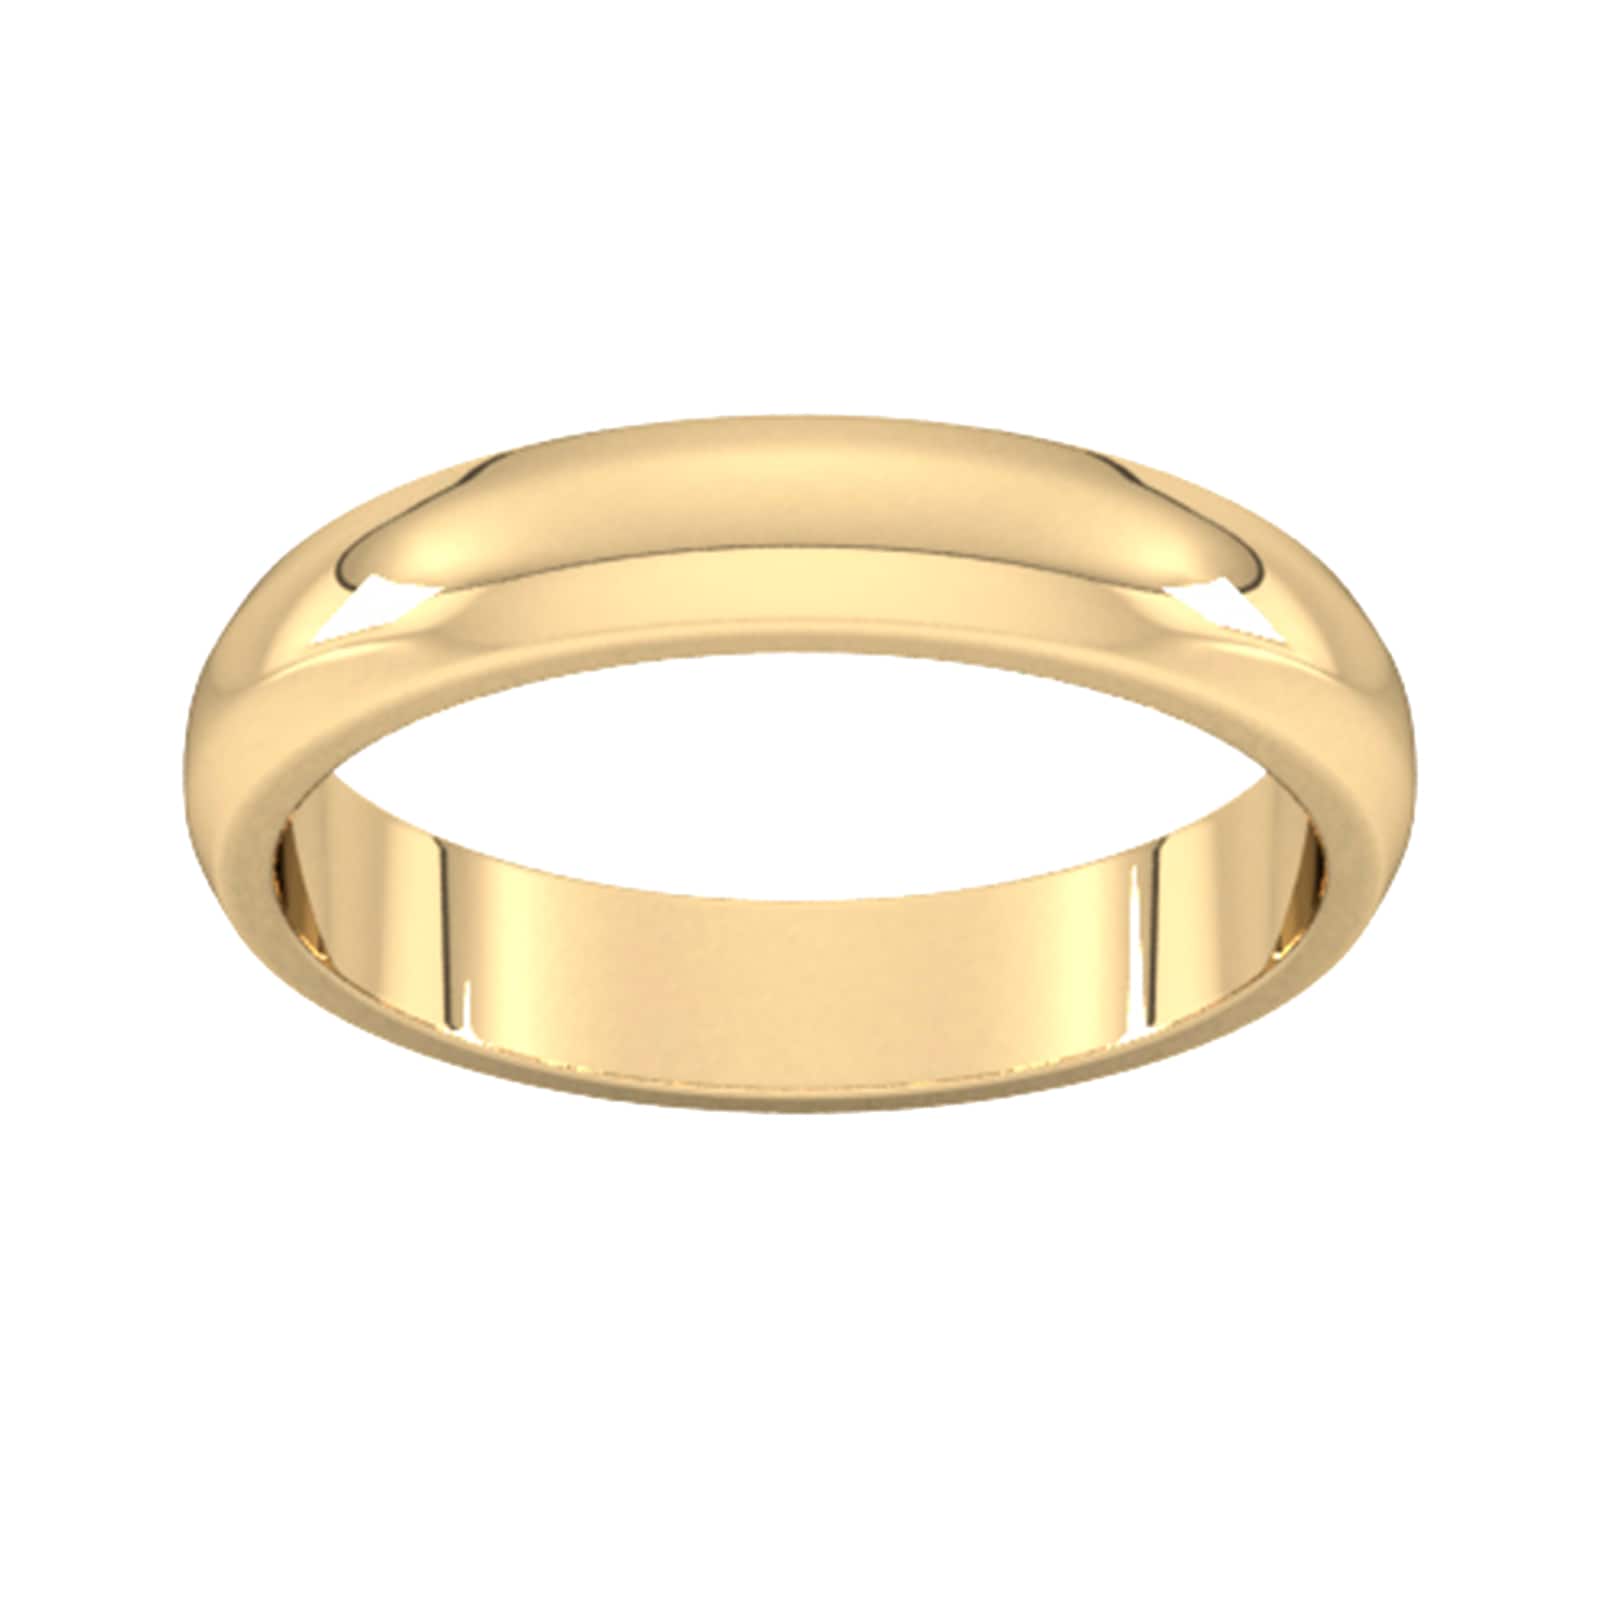 4mm D Shape Heavy Wedding Ring In 9 Carat Yellow Gold - Ring Size X